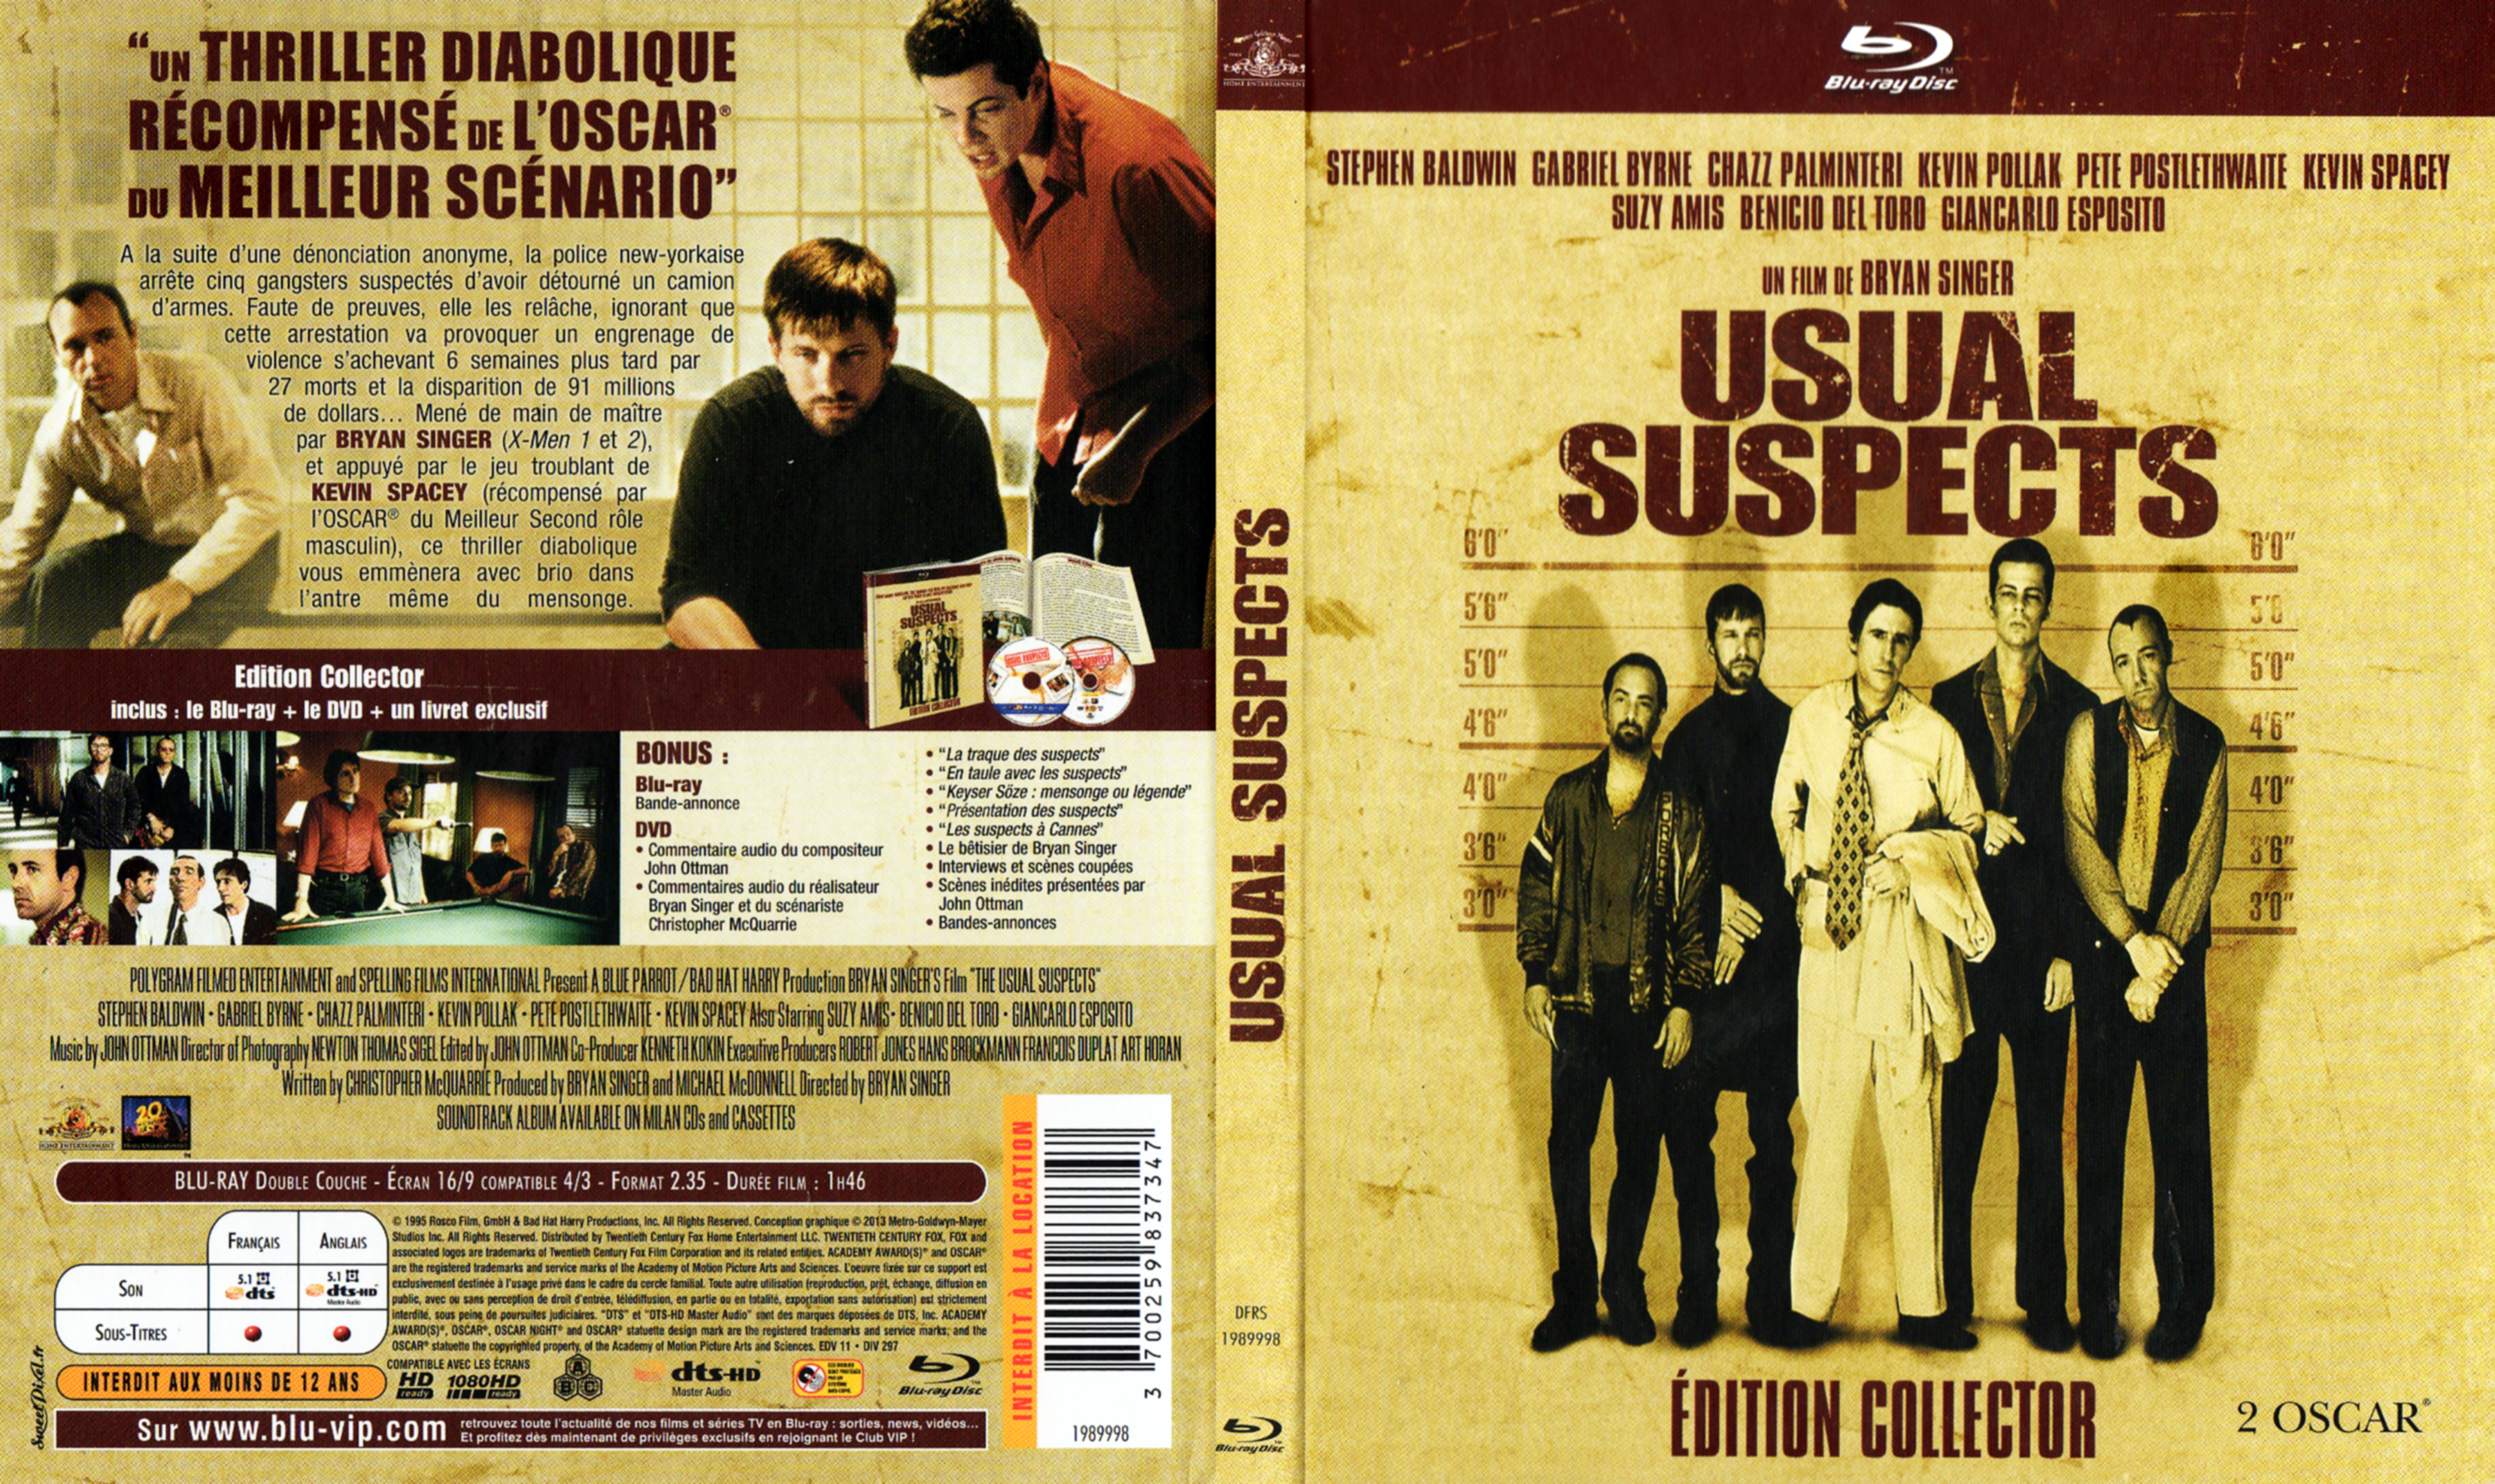 Jaquette DVD Usual suspects (BLU-RAY) v2